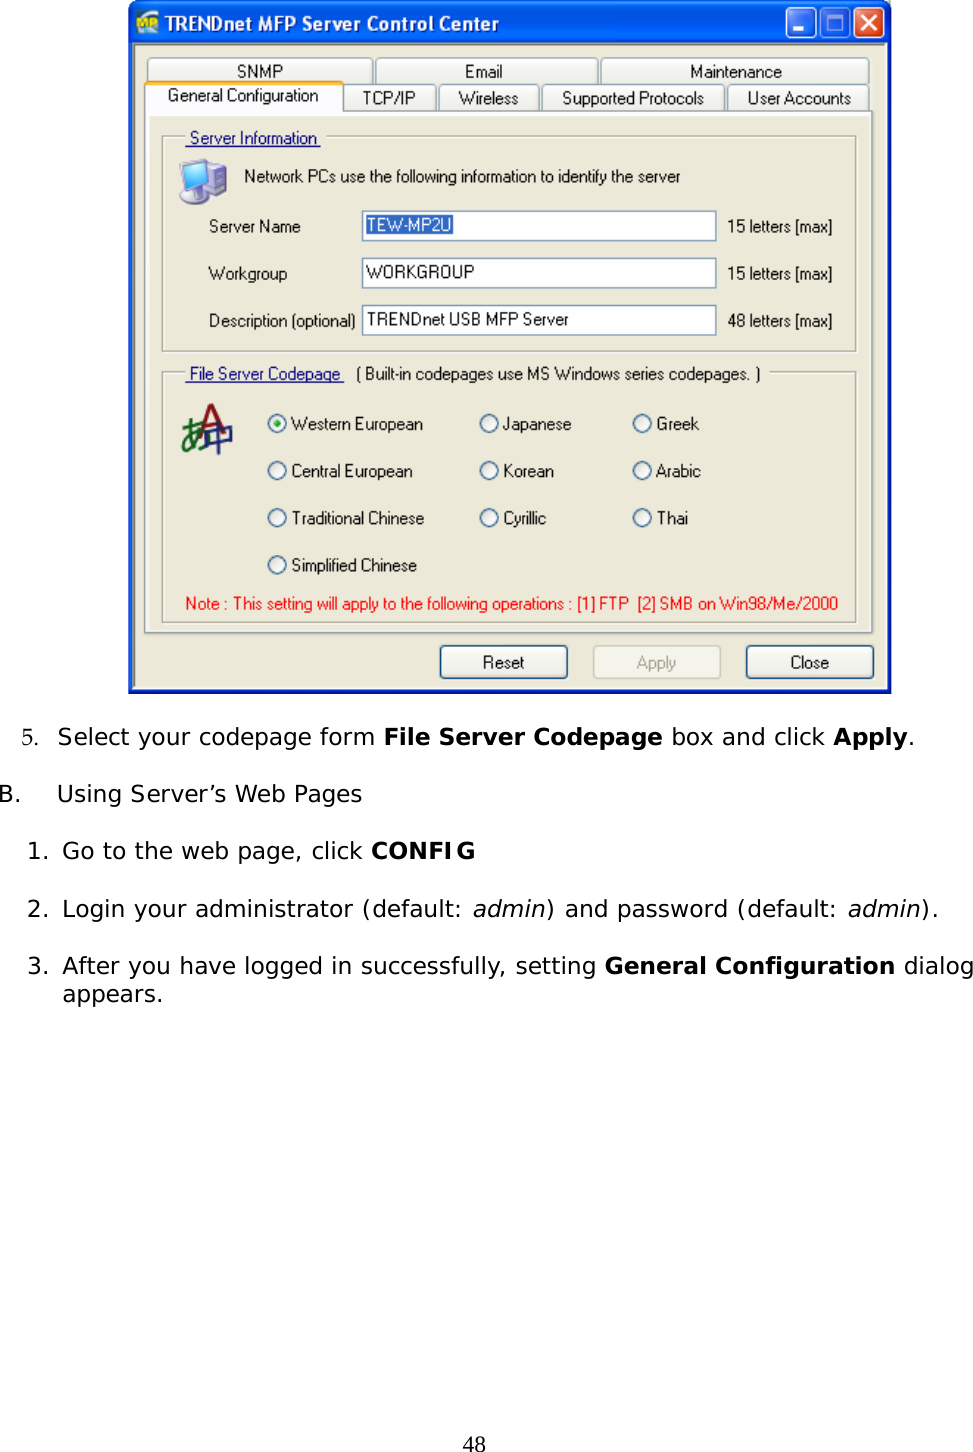     48  5. Select your codepage form File Server Codepage box and click Apply.  B.  Using Server’s Web Pages  1. Go to the web page, click CONFIG  2. Login your administrator (default: admin) and password (default: admin).  3. After you have logged in successfully, setting General Configuration dialog appears.   